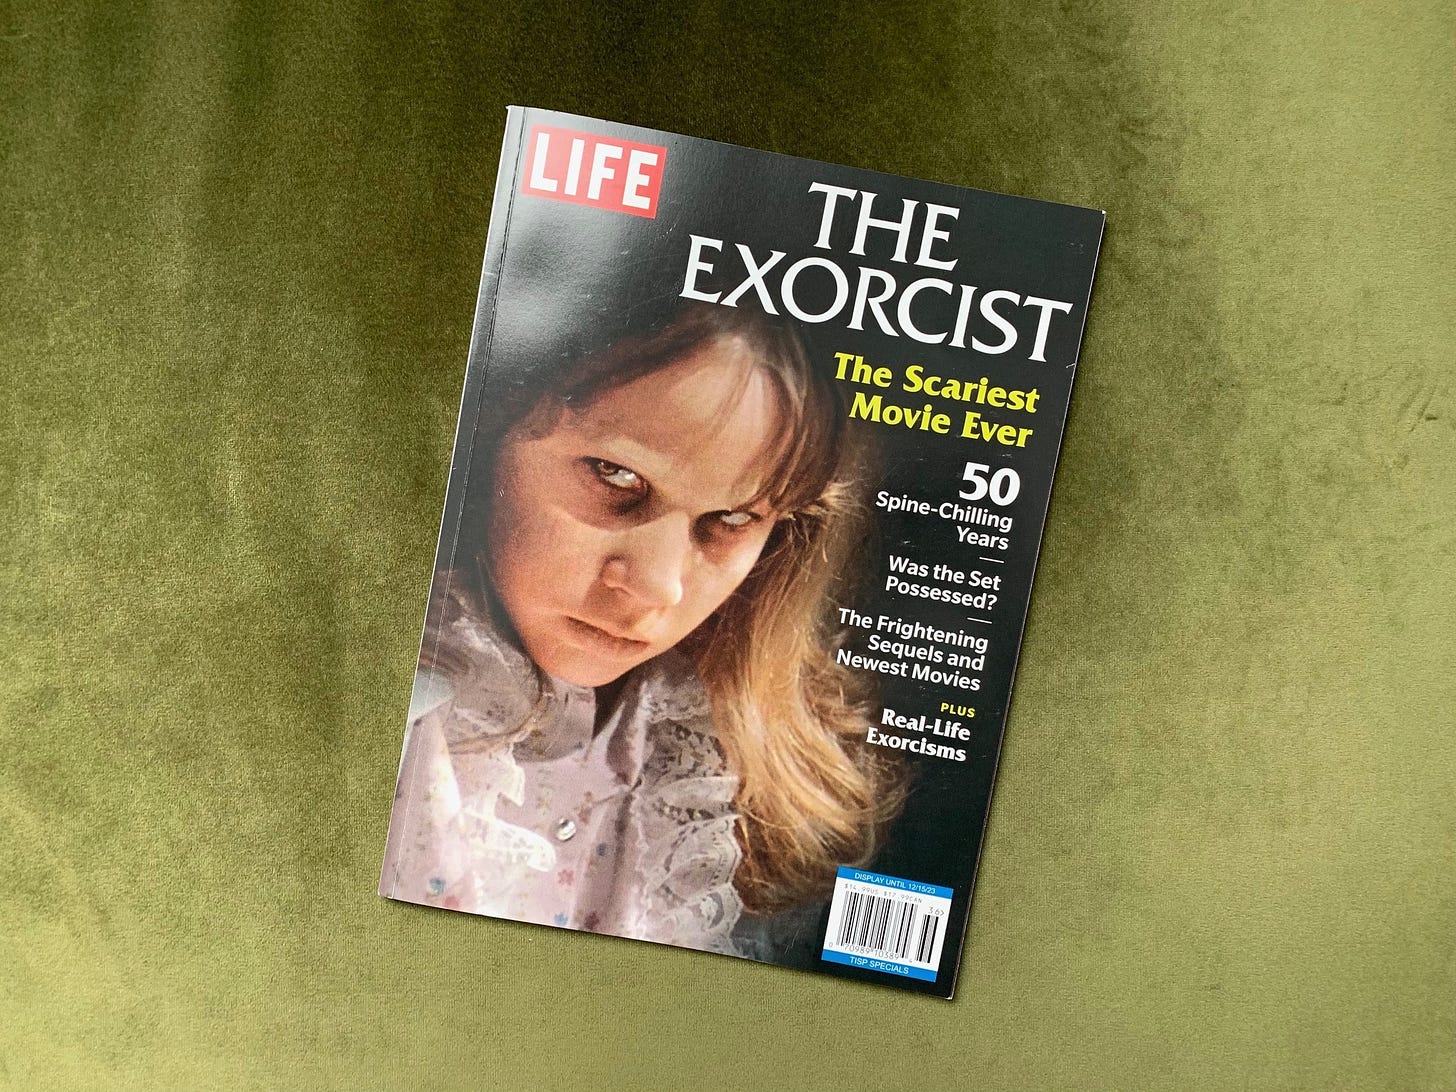 LIFE's special issue about The Exorcist, featuring Regan's scary glare